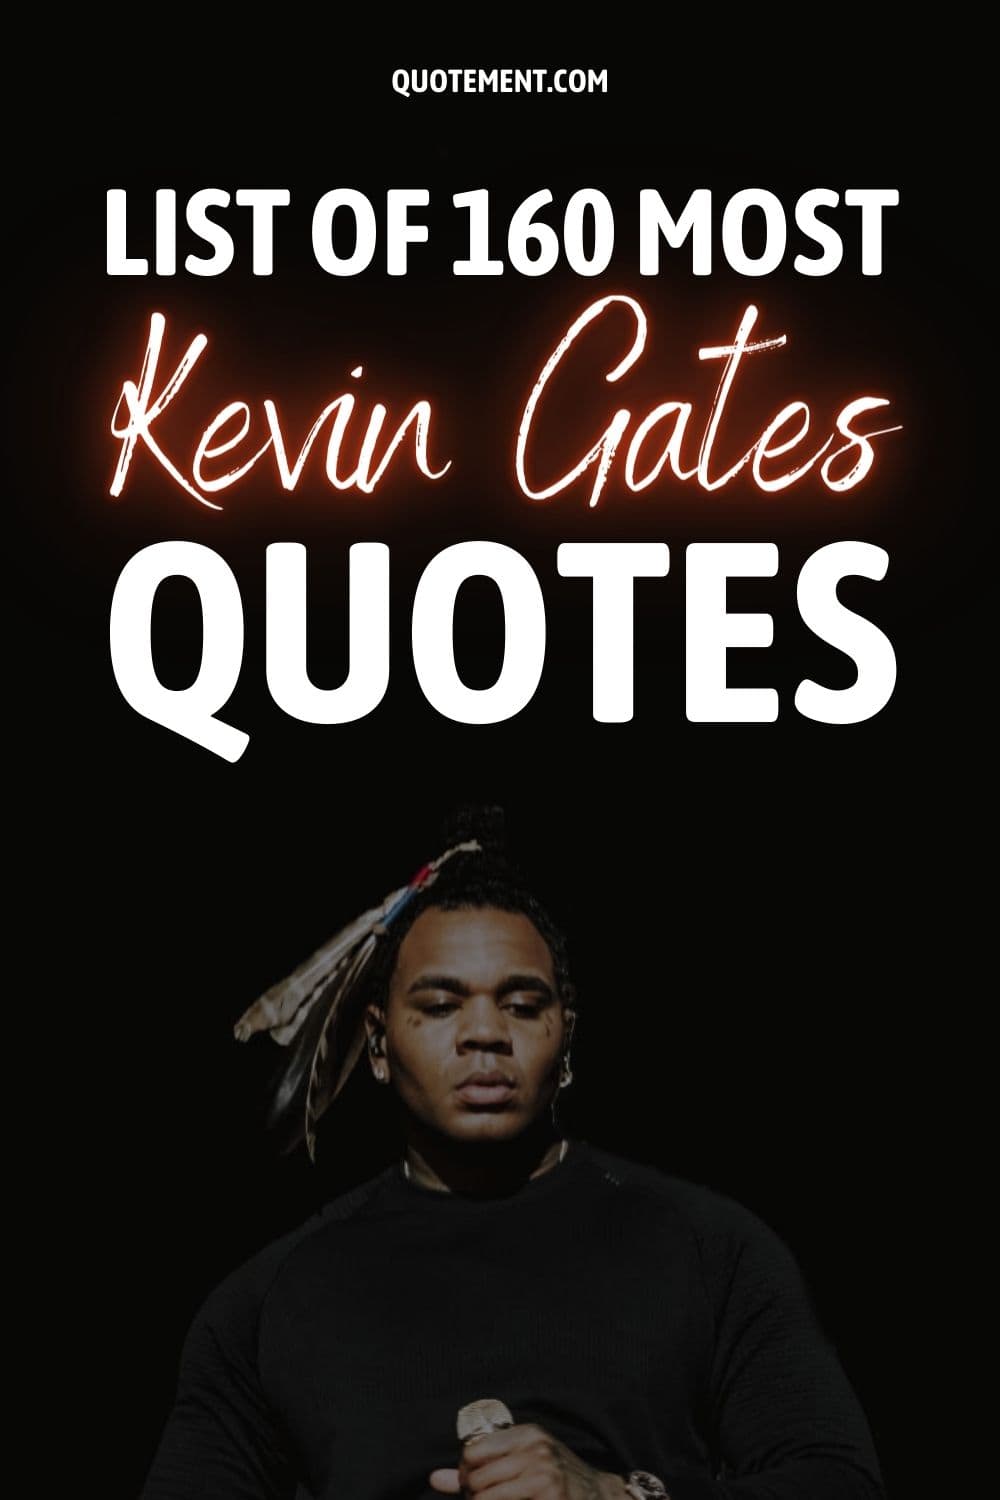 List Of 160 Most Inspirational Kevin Gates Quotes
